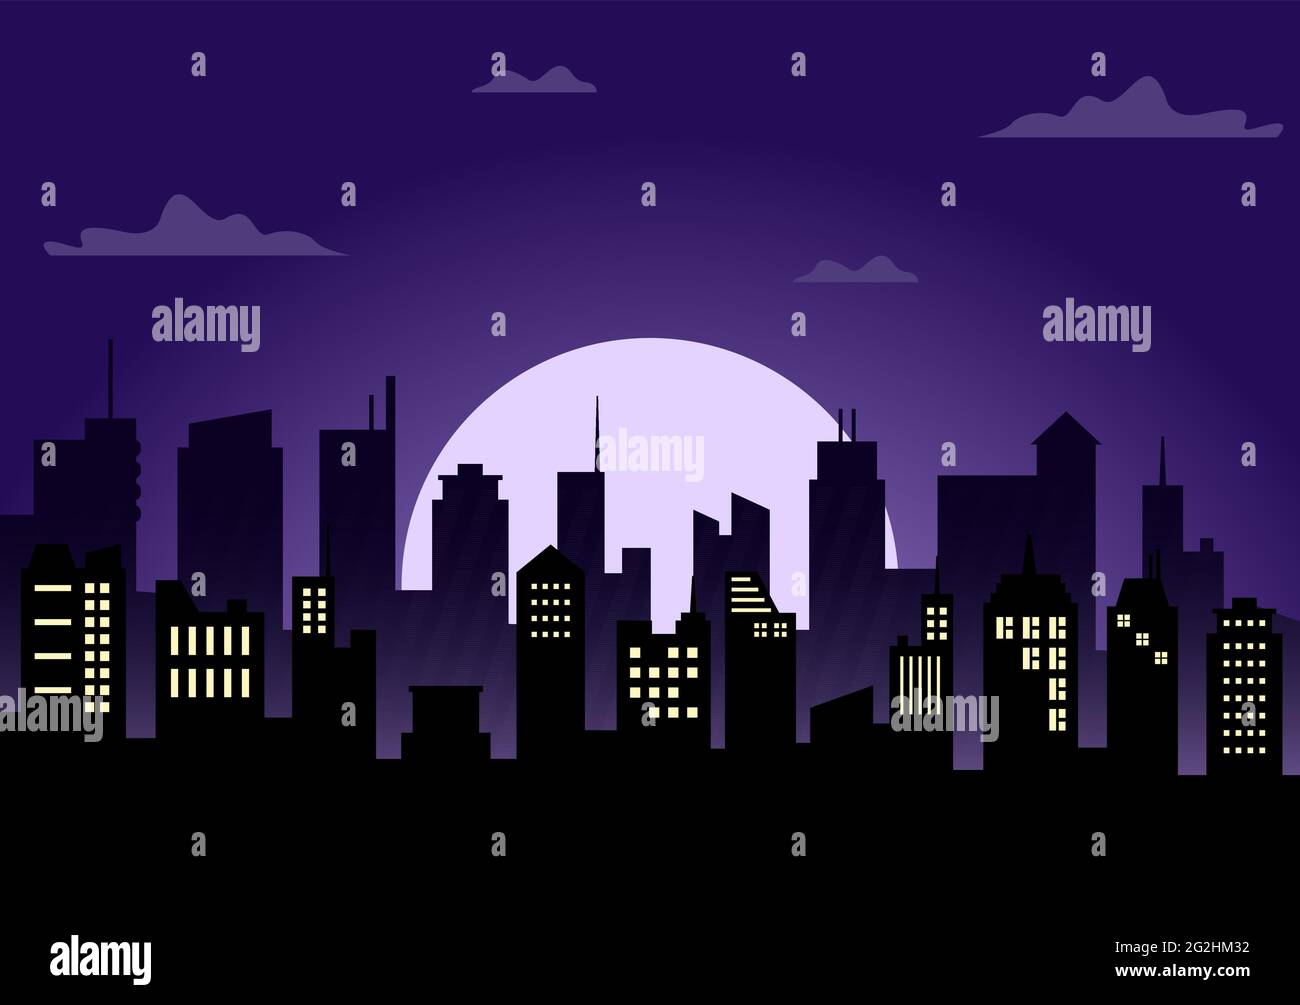 City Landscape Buildings And Architecture Silhouette Vector Background Collage Set Illustration In Simple Geometric Flat Style Stock Vector Image Art Alamy